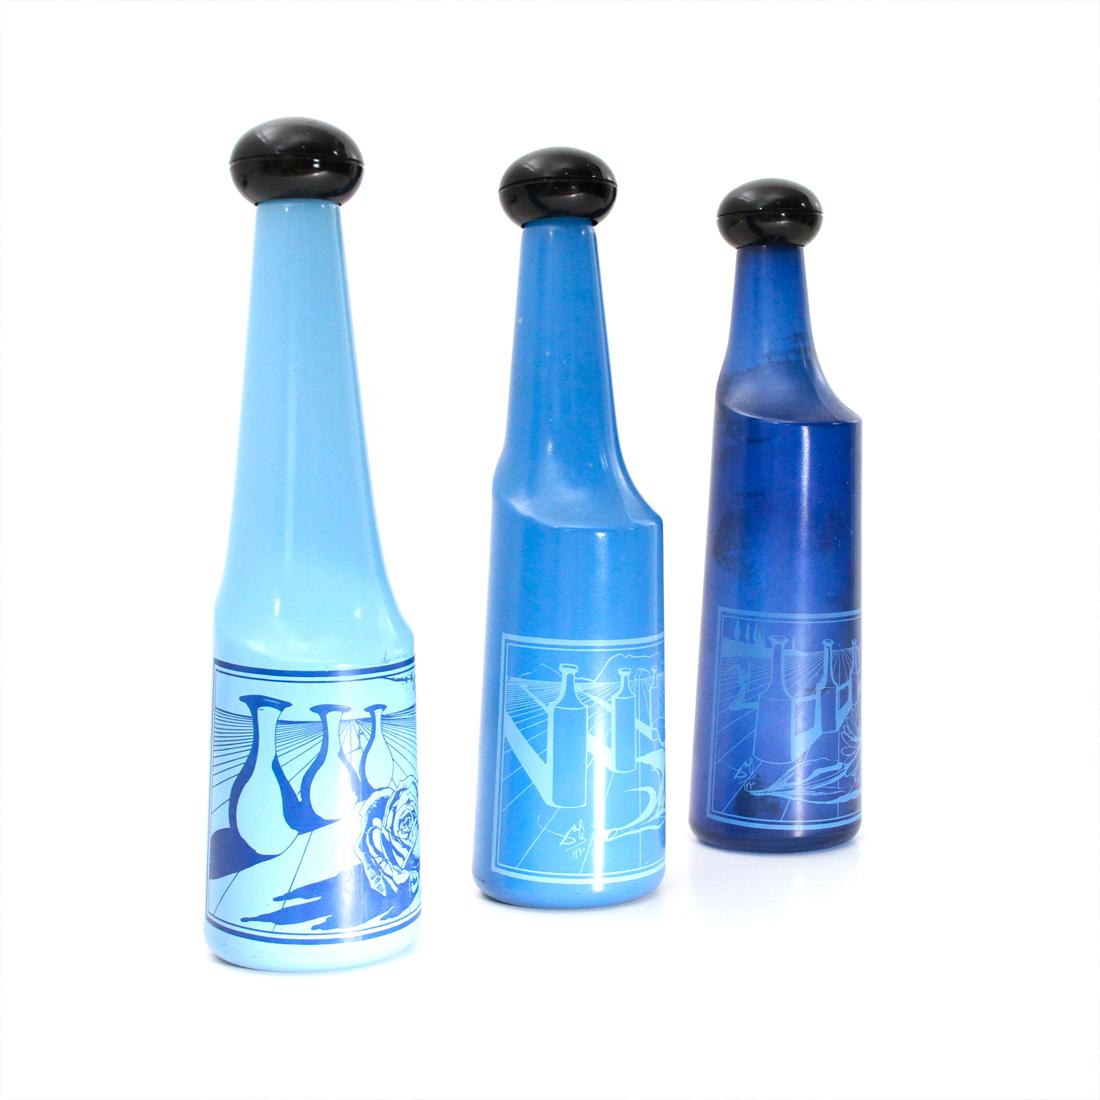 Three bottles produced by the Rosso Antico wine company and designed by Salvador Dalì in the 1970s.
Colored glass.
Prints by Salvador Dali printed.
Good general condition, some signs due to normal use over time, a bottle is dirty